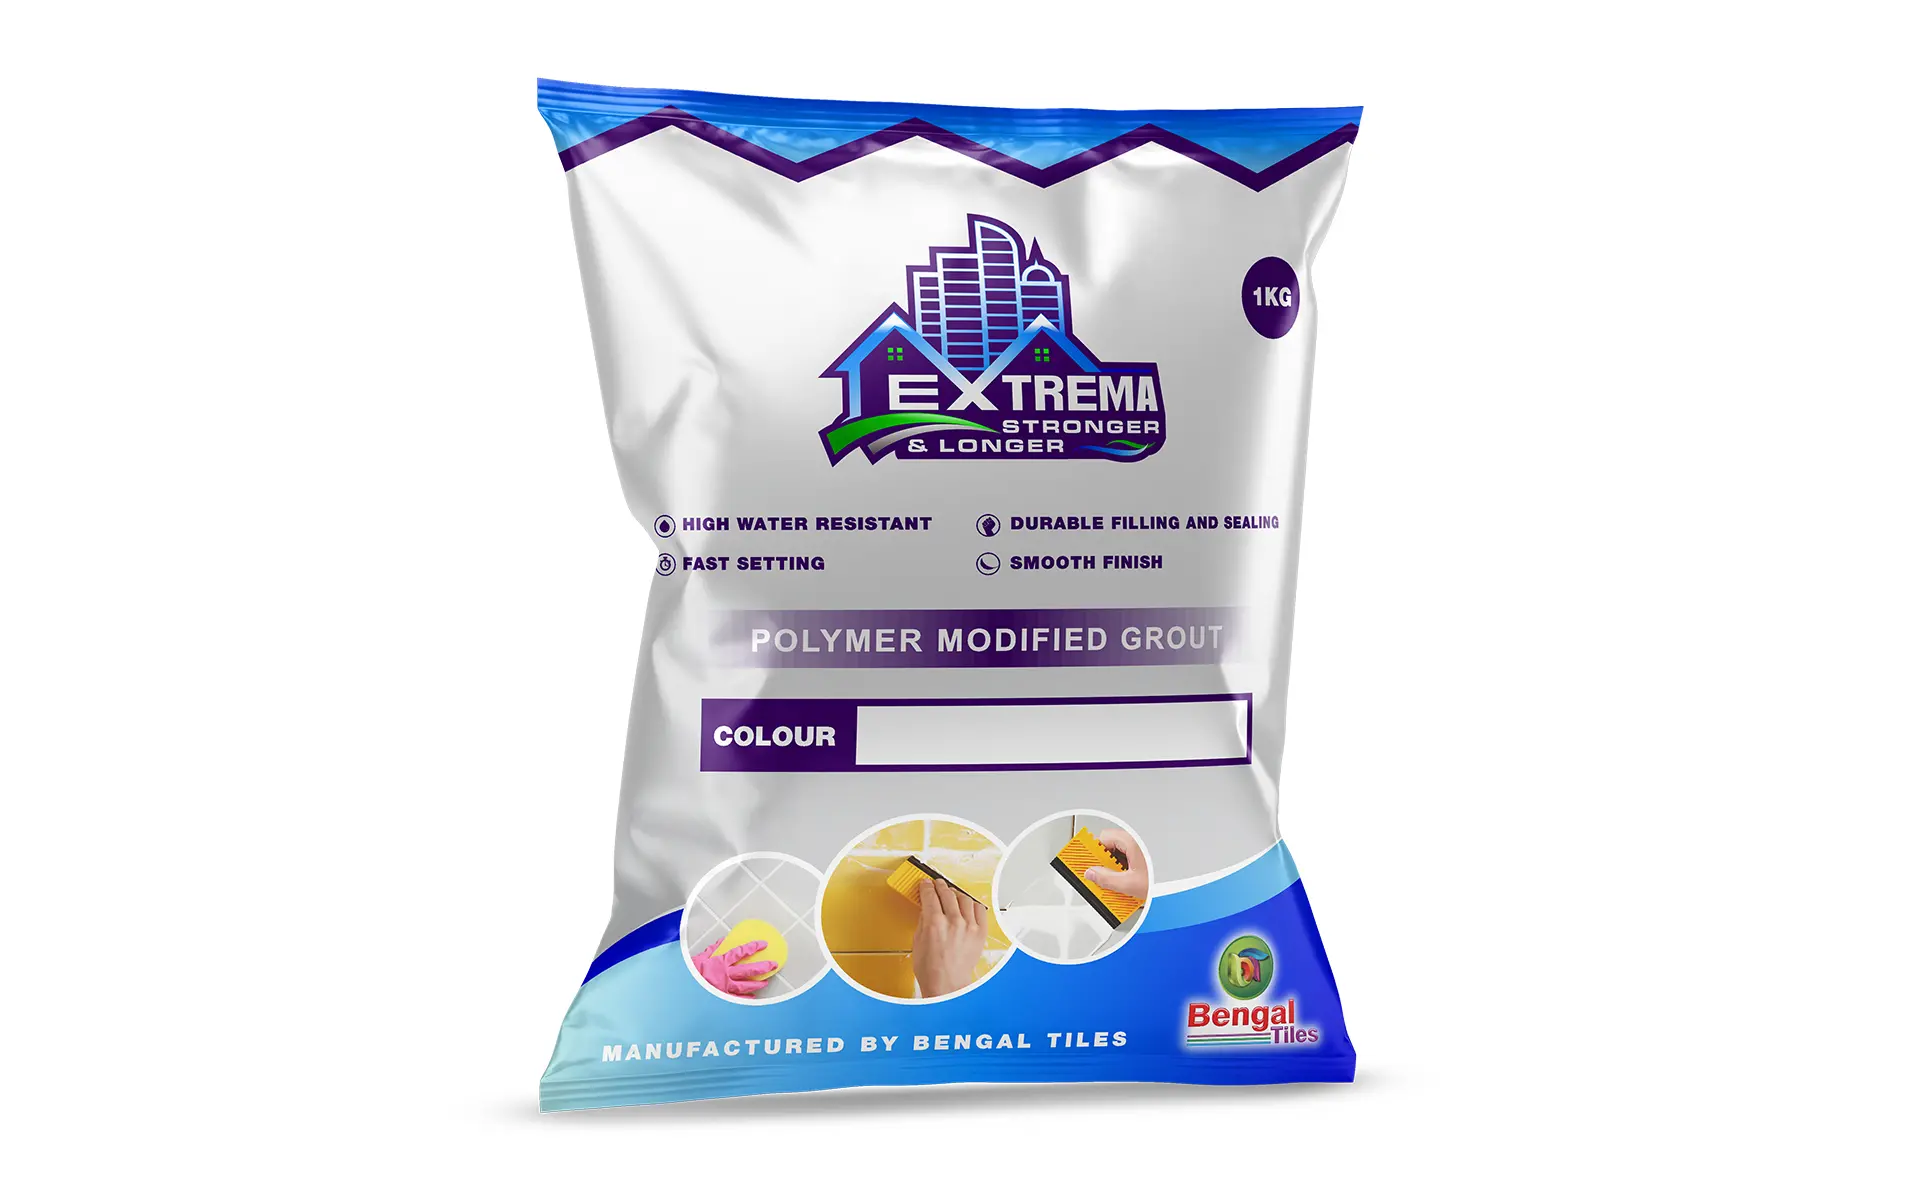 Extrema Grout